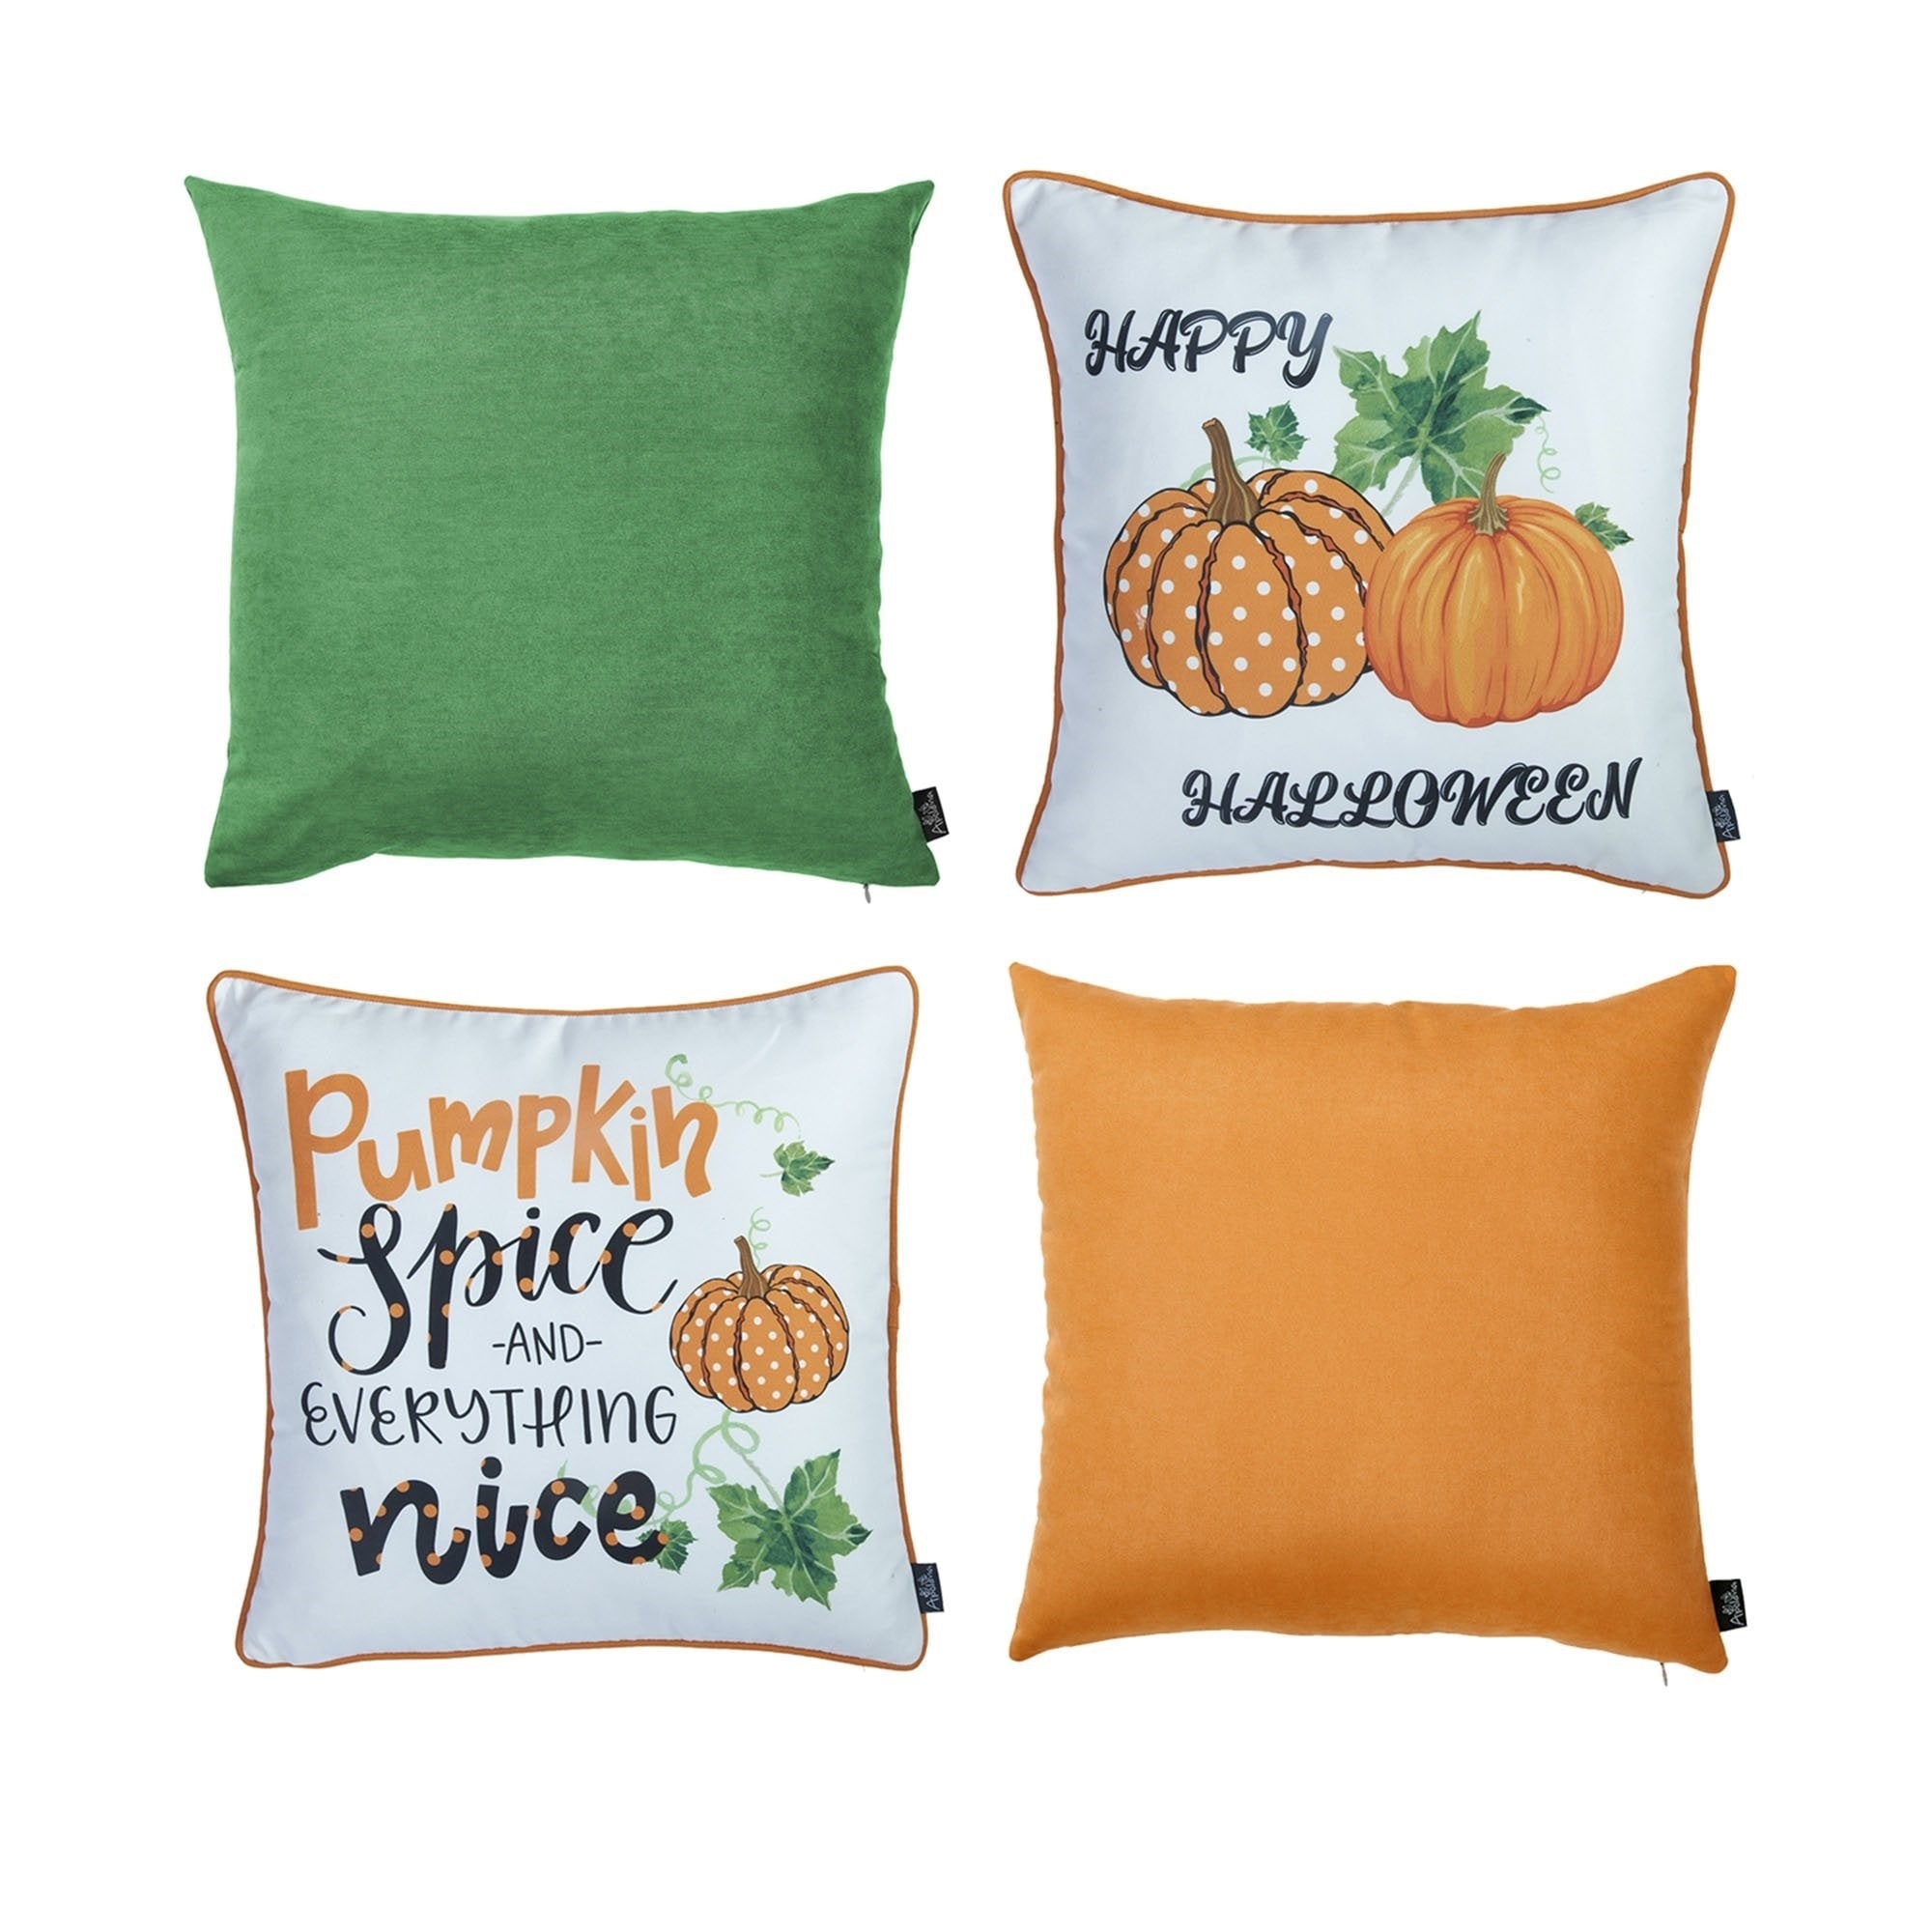 https://ak1.ostkcdn.com/images/products/is/images/direct/4d2d353488e2fa48dfcdbd8c432e11a4d50bf034/Decorative-Fall-Thanksgiving-Throw-Pillow-Cover-Halloween-Set-of-4.jpg